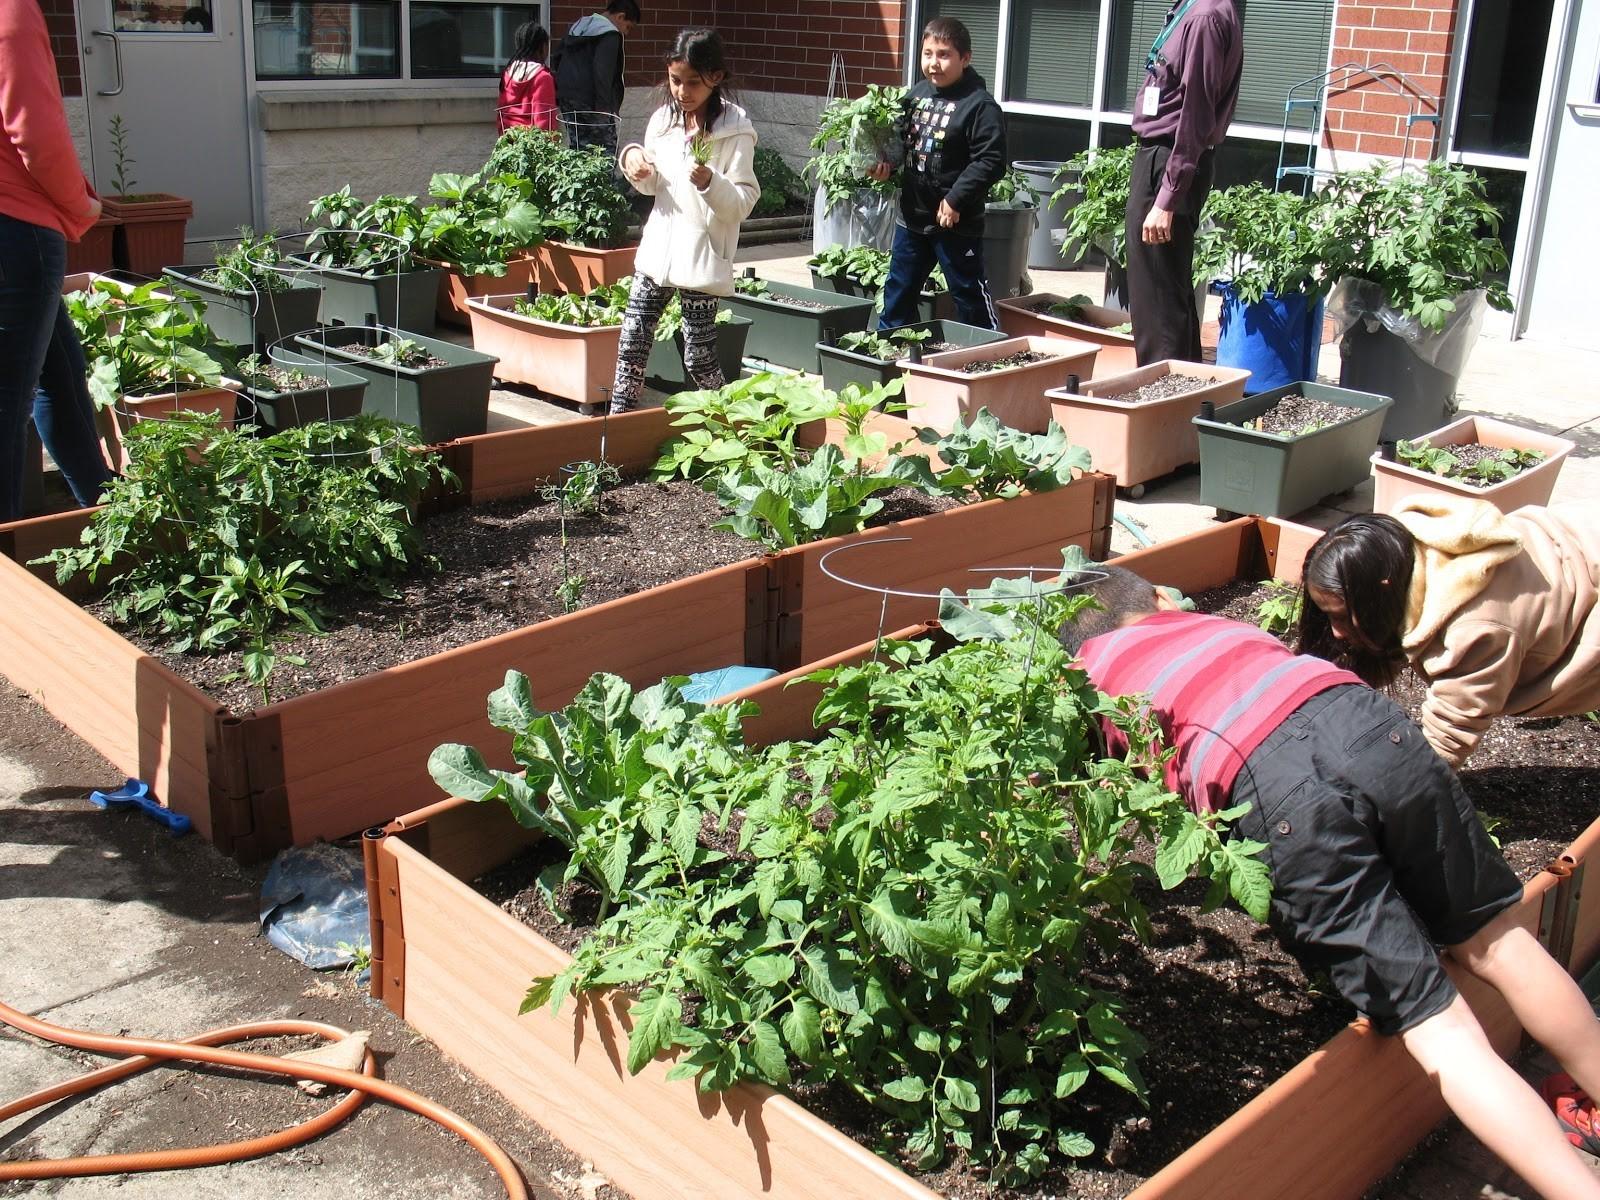 Students harvest from raised beds. Make sure beds are built on level ground with easy access and available water.